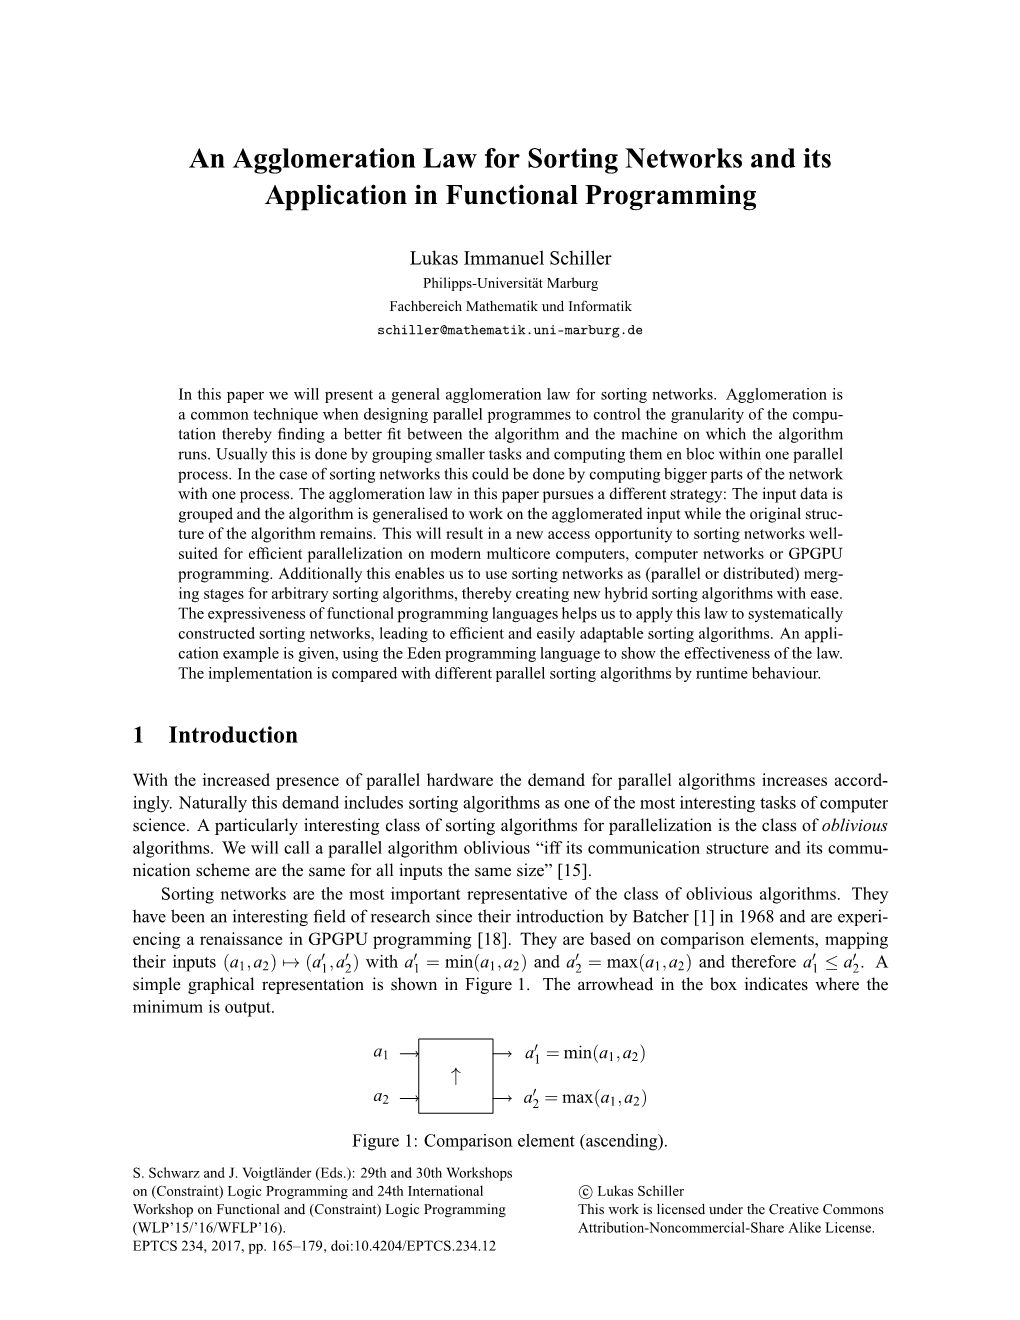 An Agglomeration Law for Sorting Networks and Its Application in Functional Programming